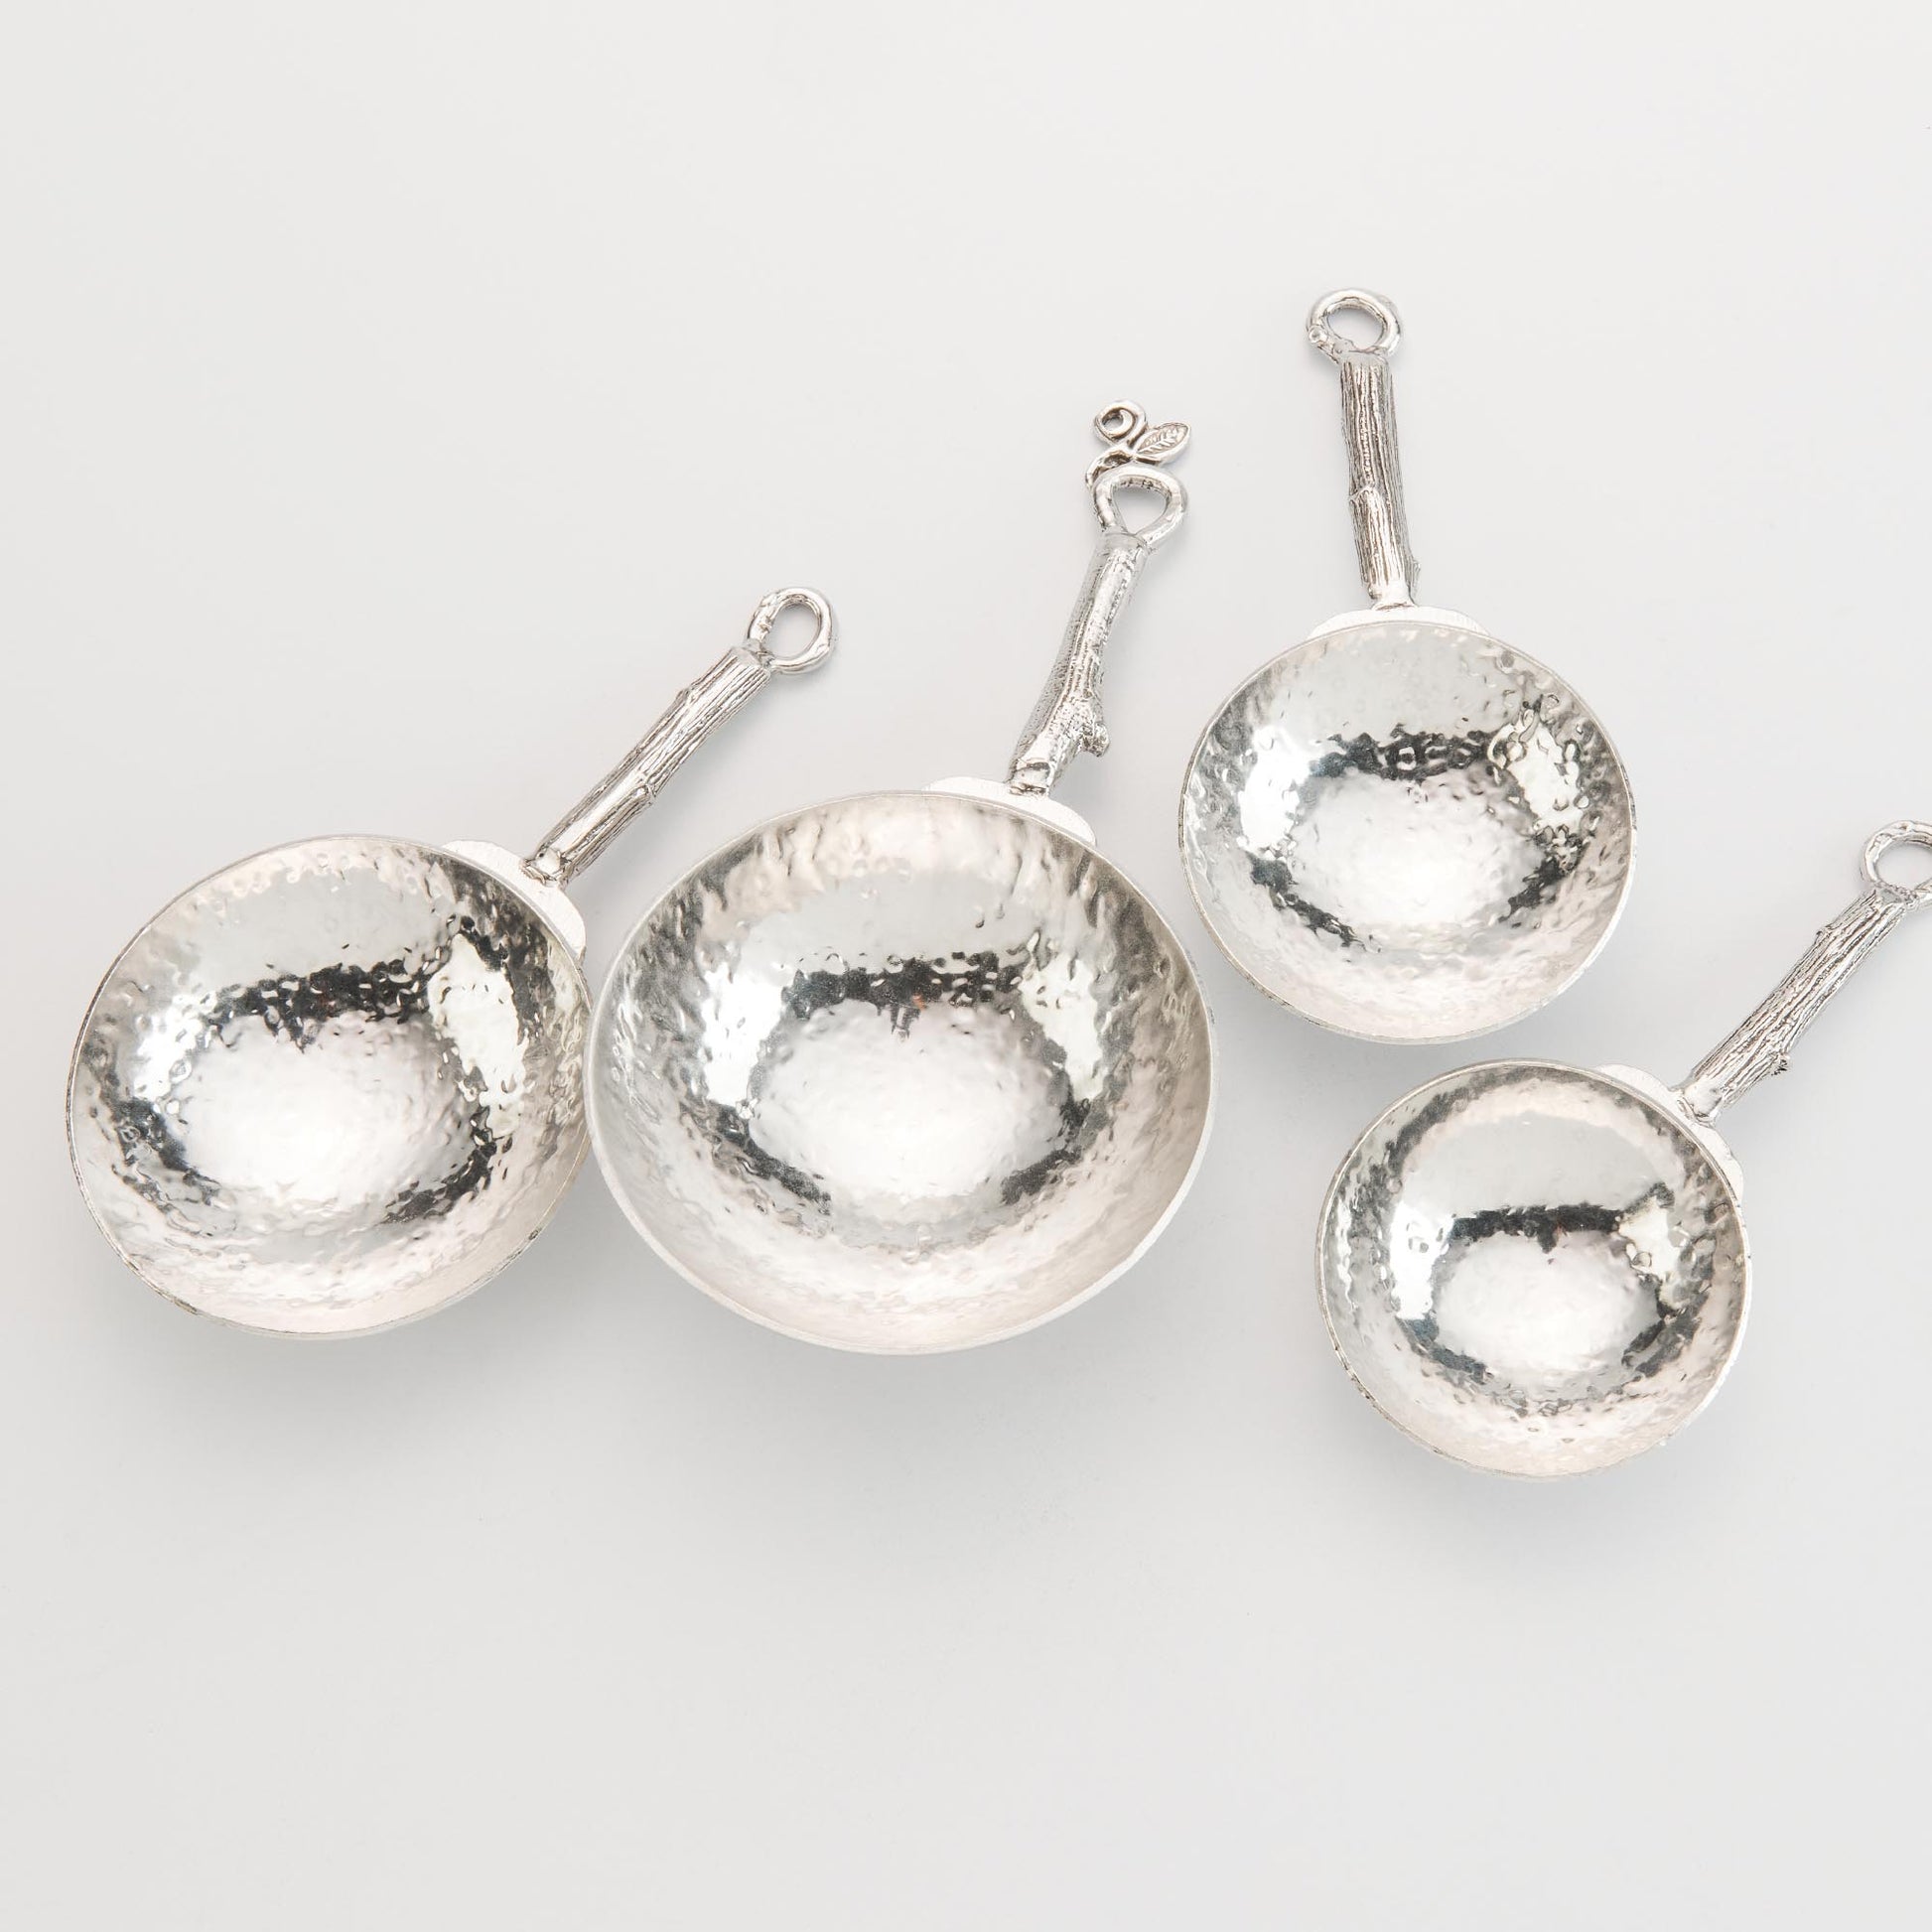 Shop Handcrafted Pewter Homestead Measuring Cups